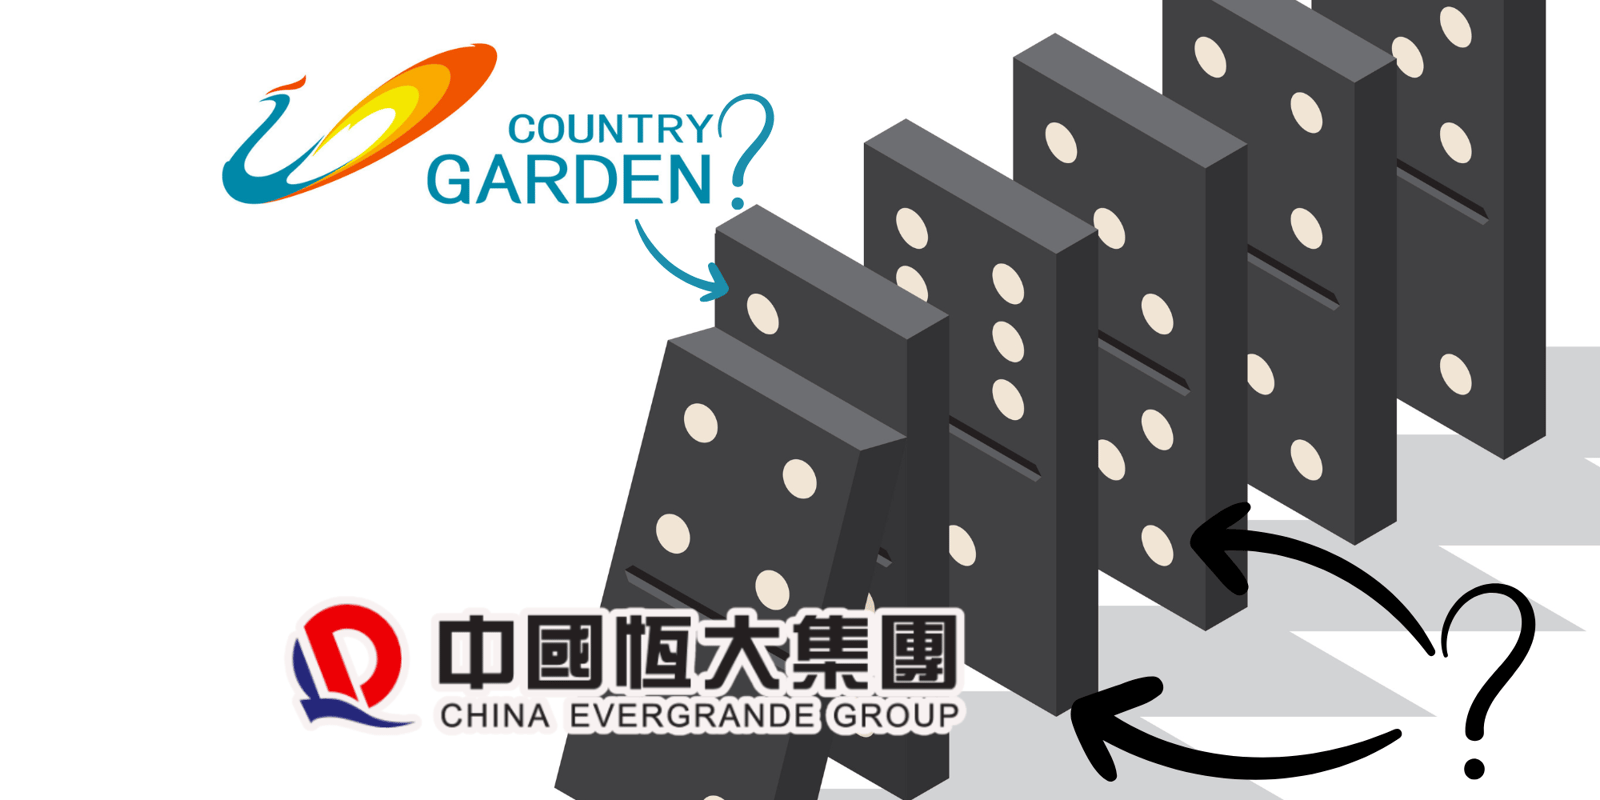 Visualization of Chinese property developers as dominos waiting to fall after Evergrande, with Country Garden possibly the next to go.